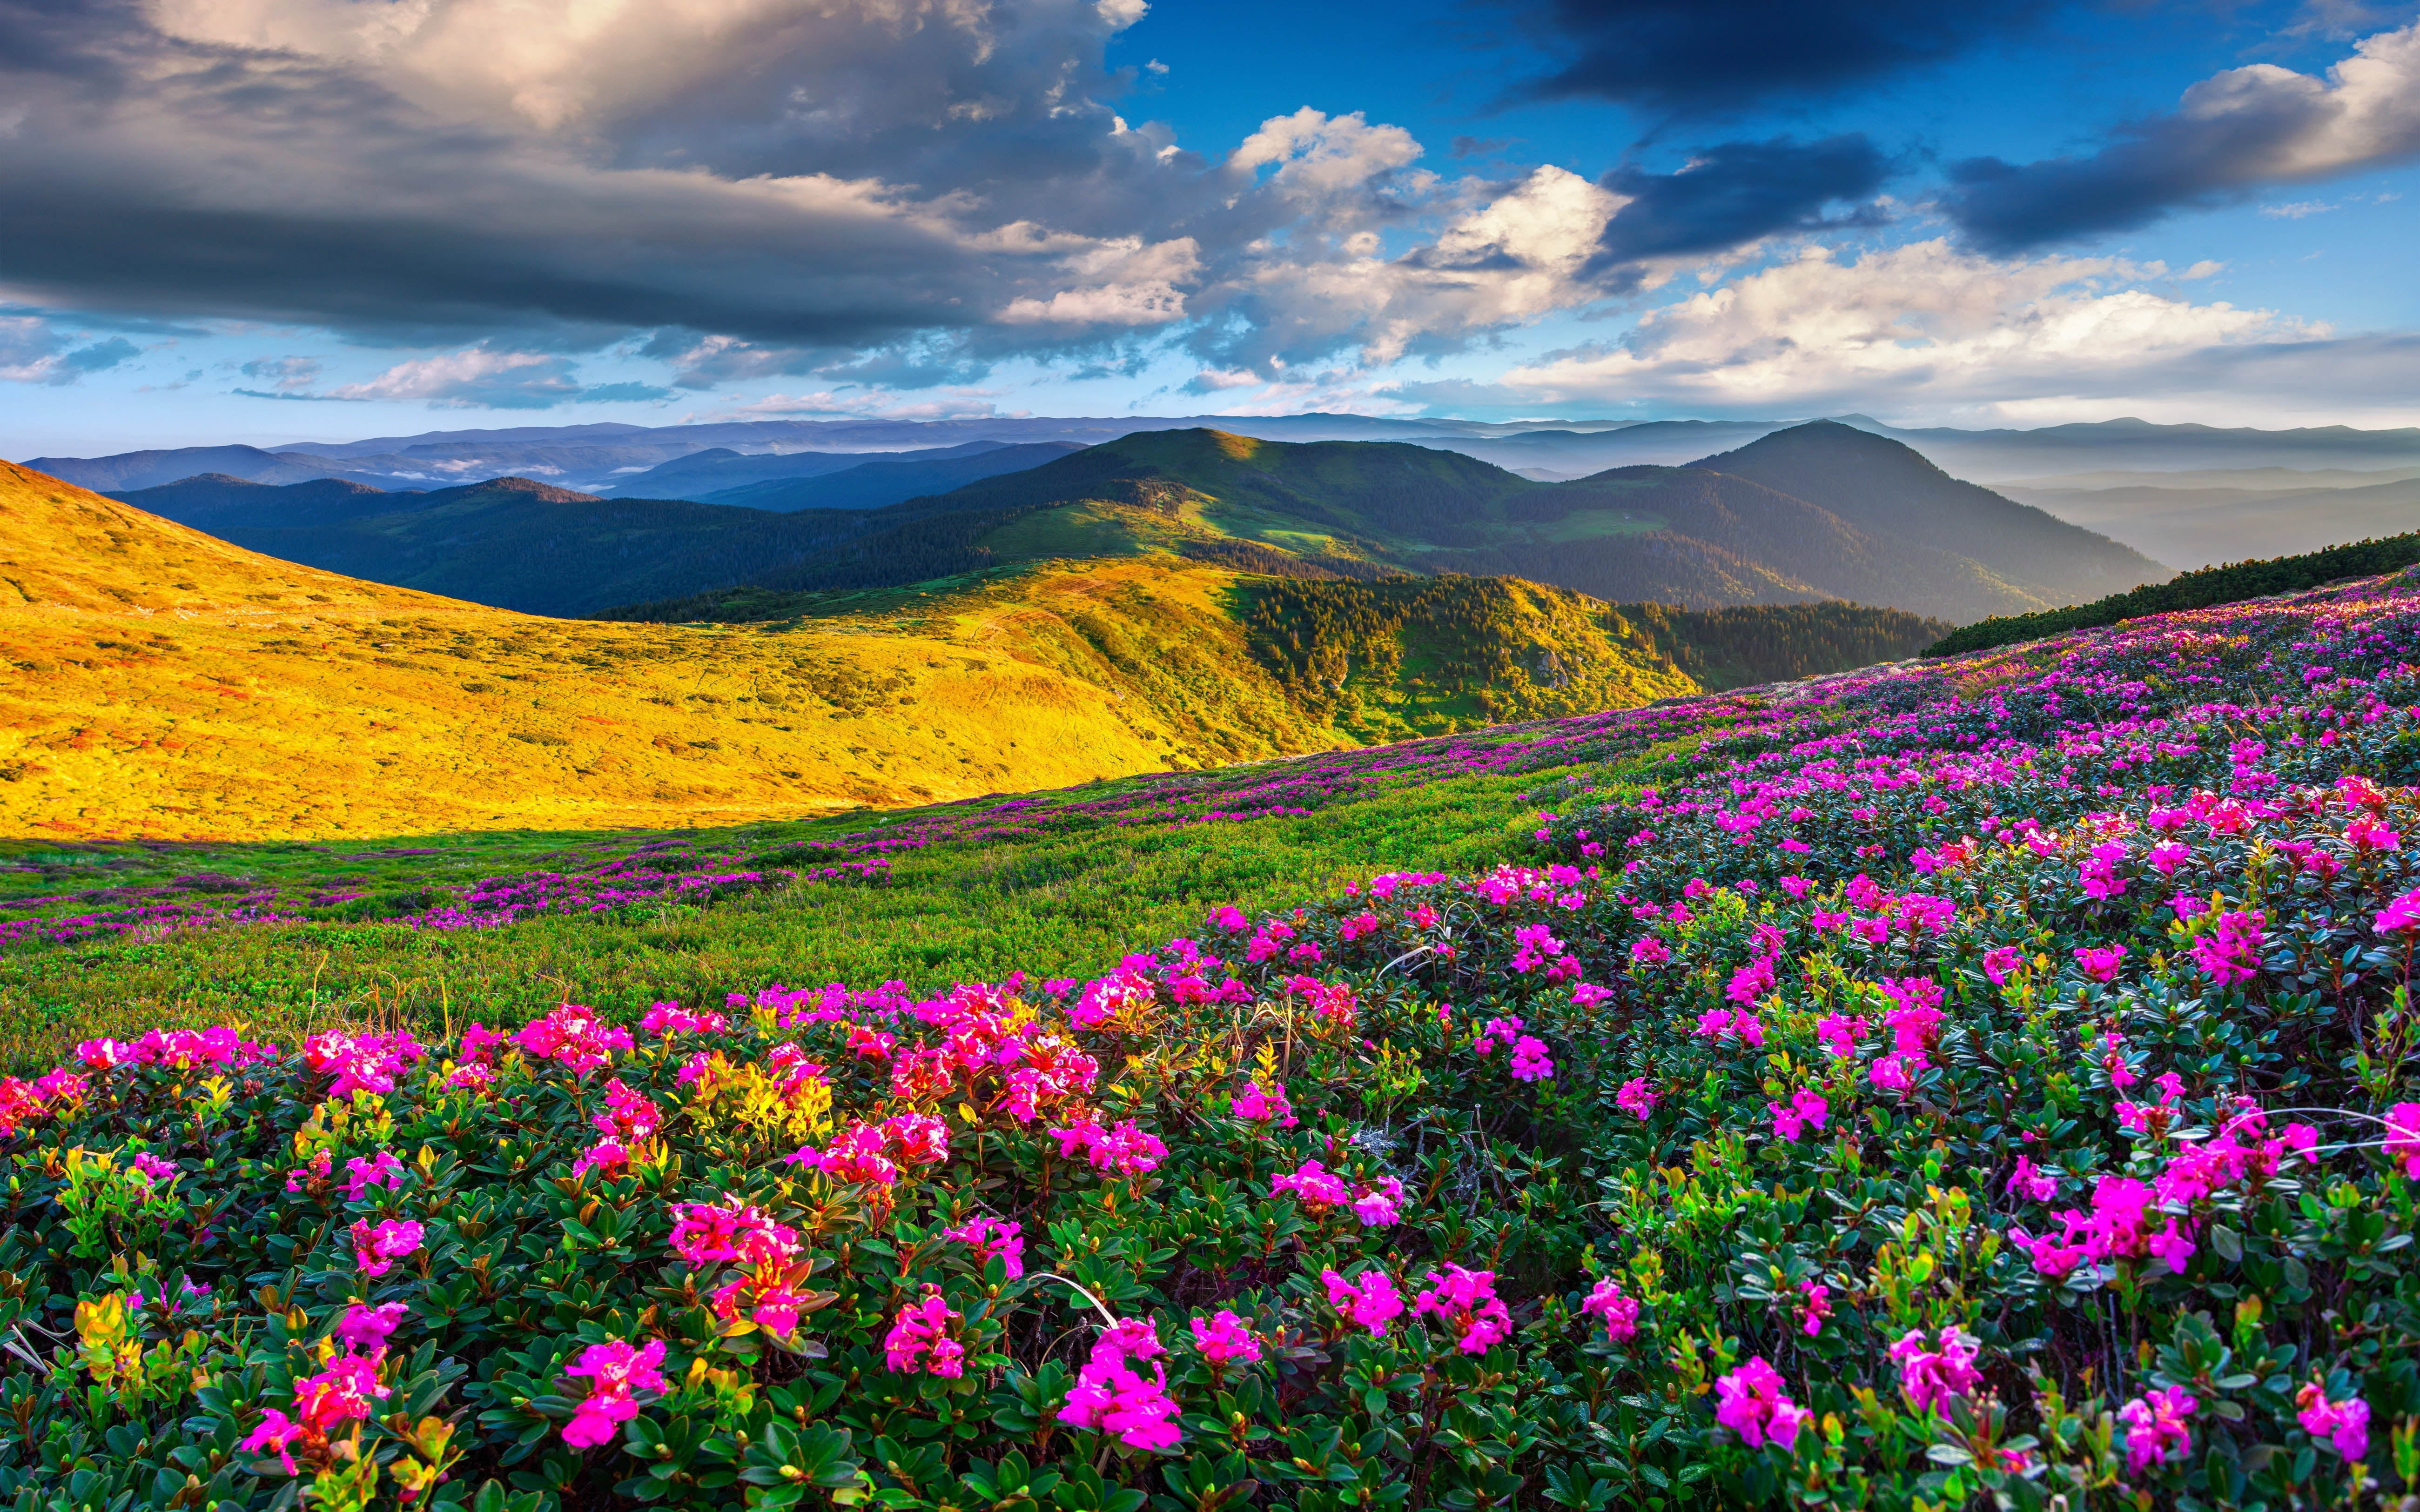 Spring Mountain Landscape Flowers Purple Colored Hills With Green Grass Dark Clouds On The Sky Desktop Wallpaper Backgrounds Hd 5200×3250